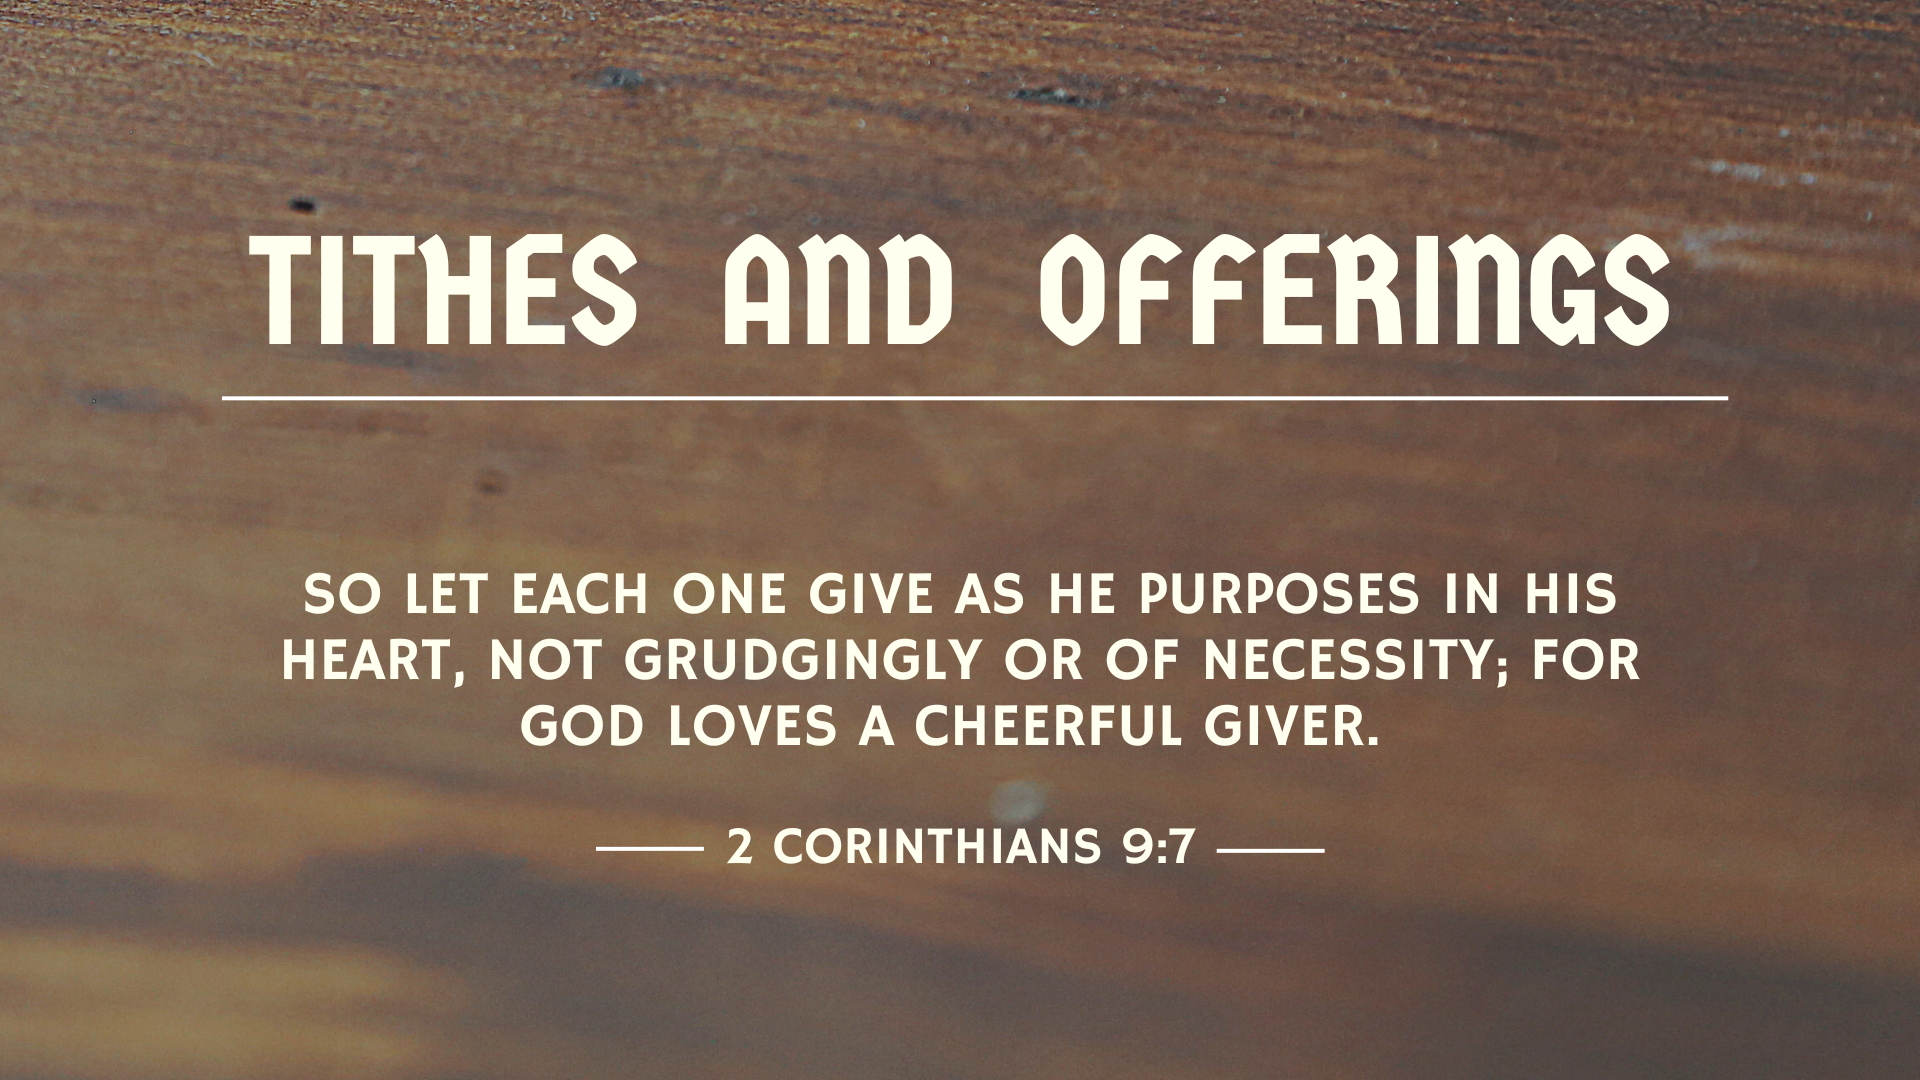 TITHES AND OFFERINGS